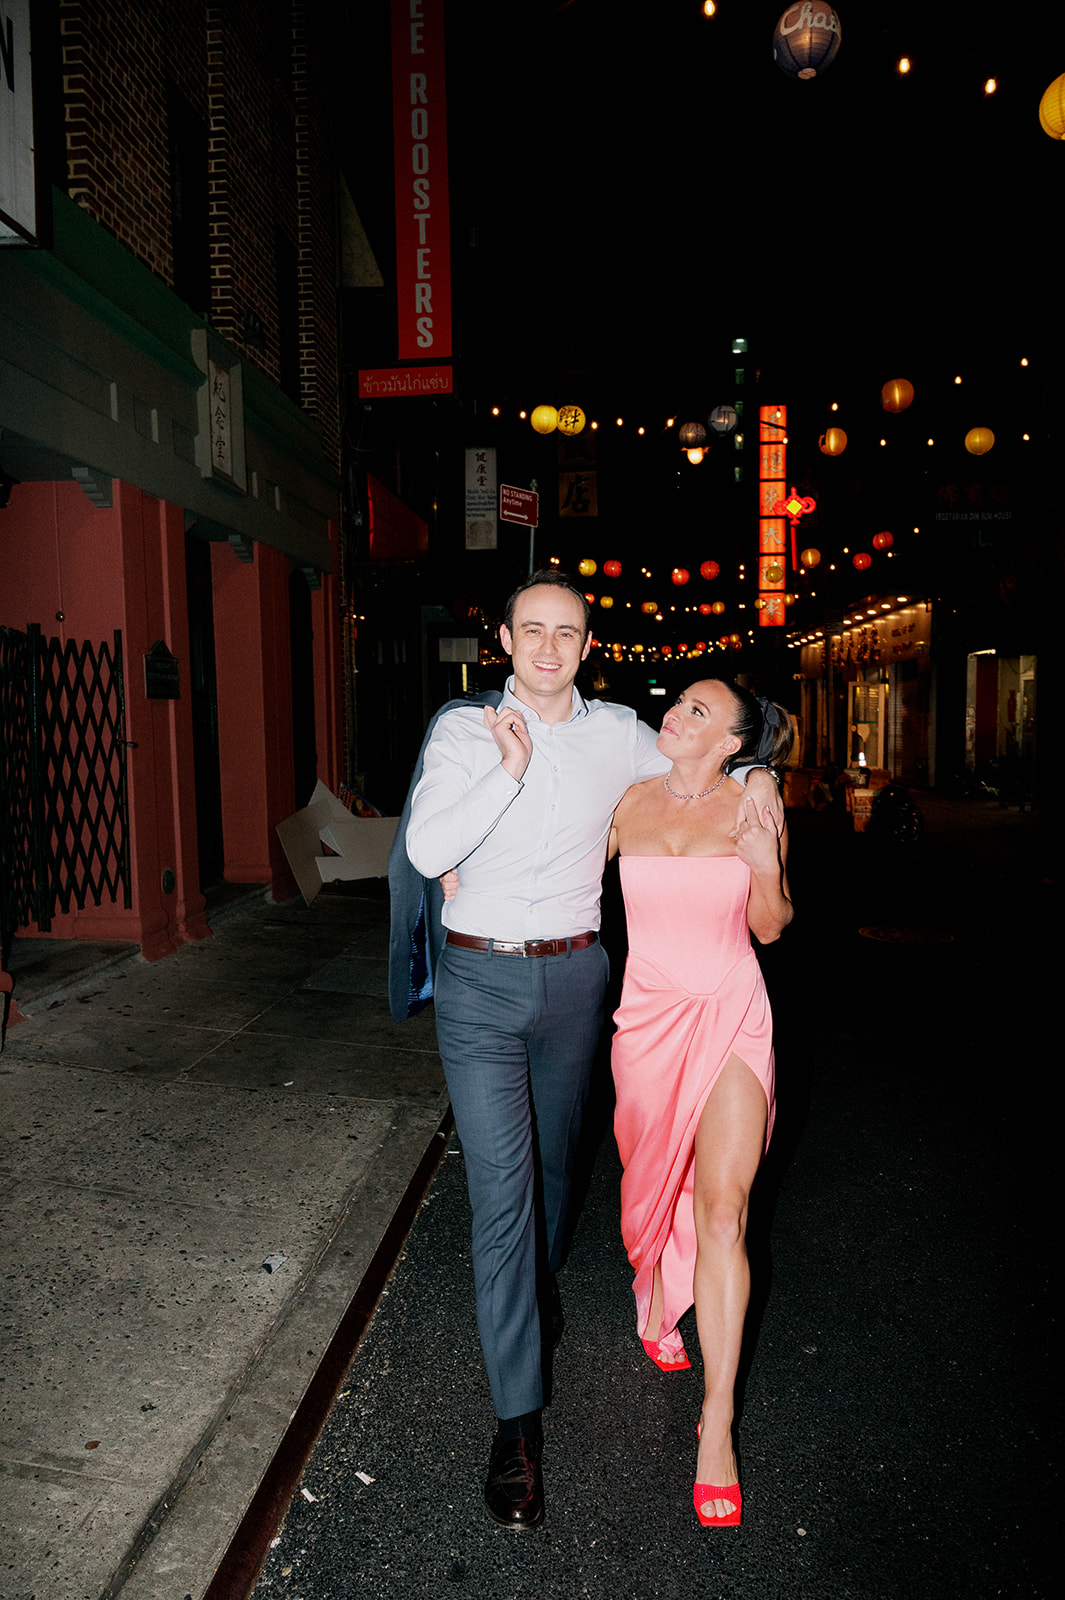 Nighttime flash photo of a couple walking in Chinatown.